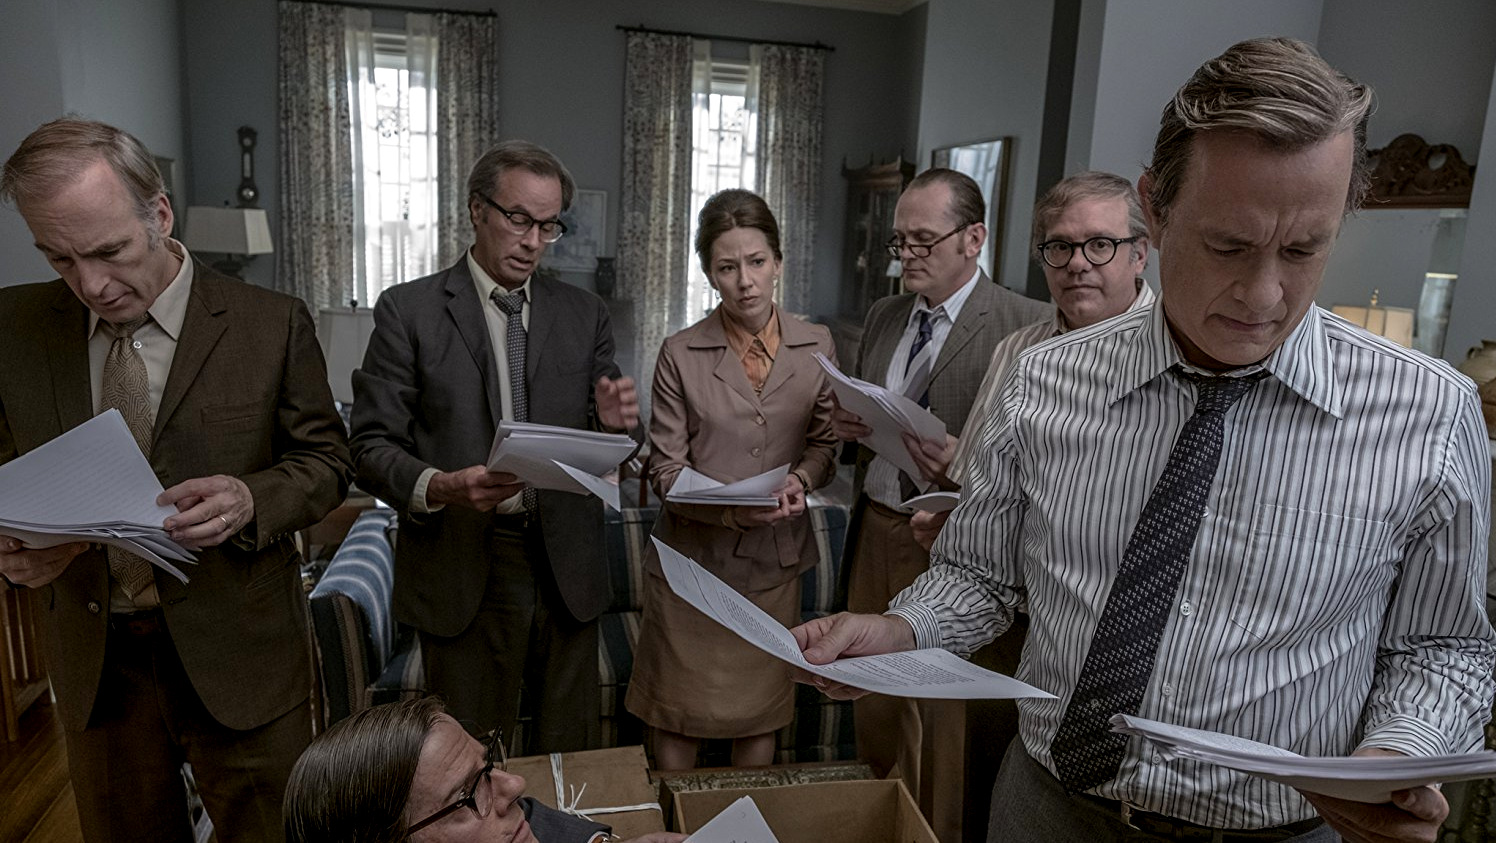 A screenshot from Steven Spielberg's film, 'The Post'.